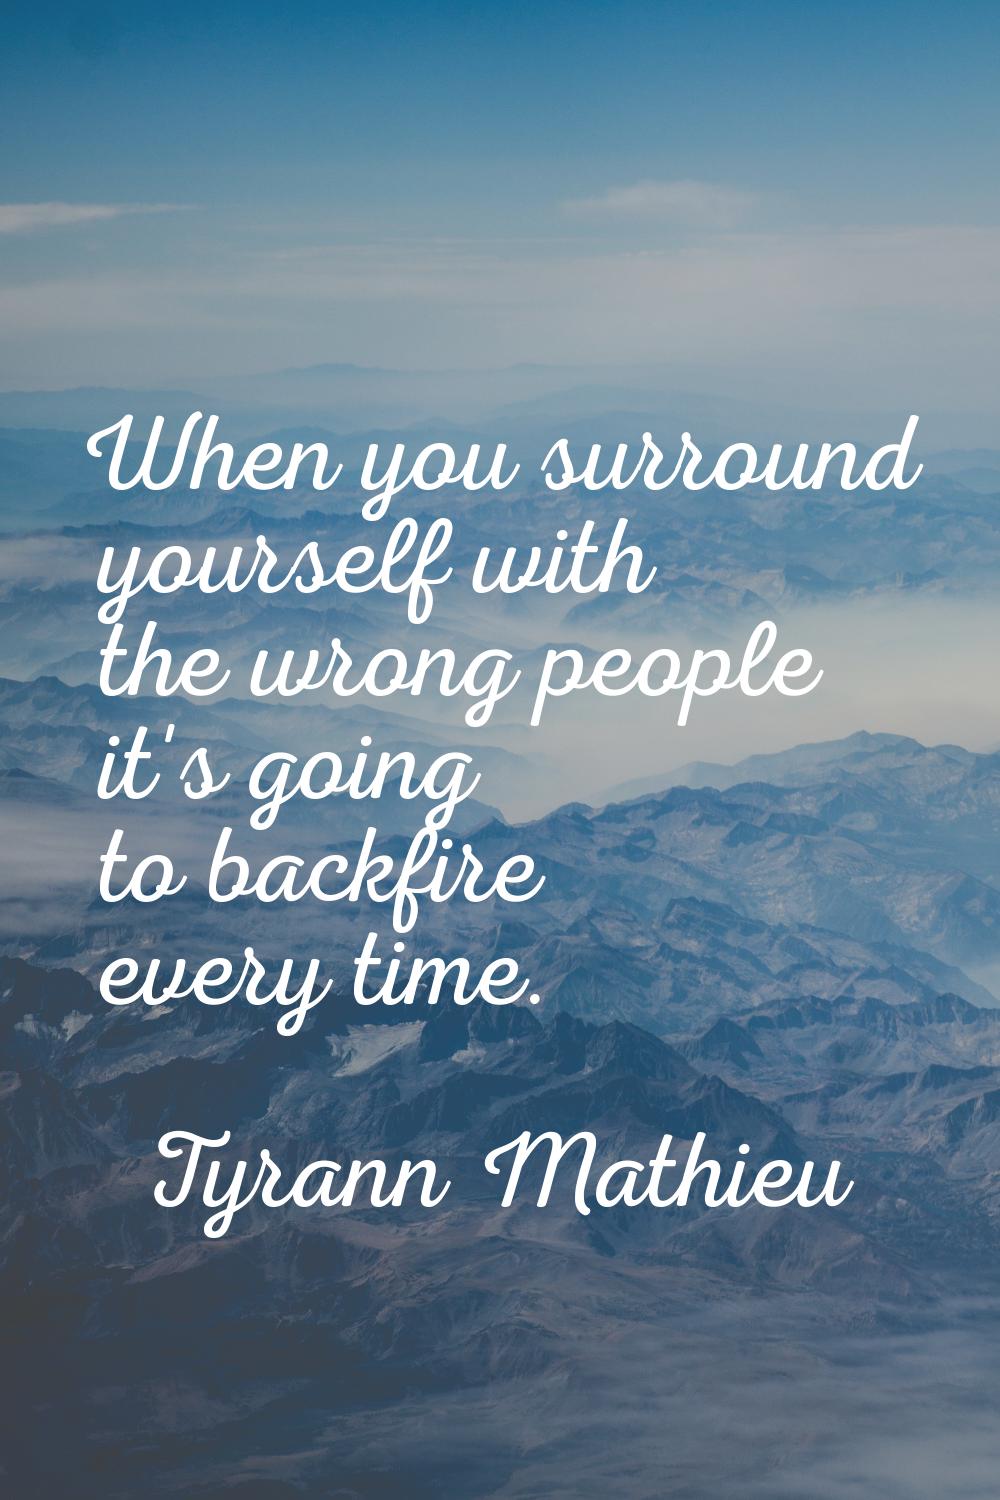 When you surround yourself with the wrong people it's going to backfire every time.